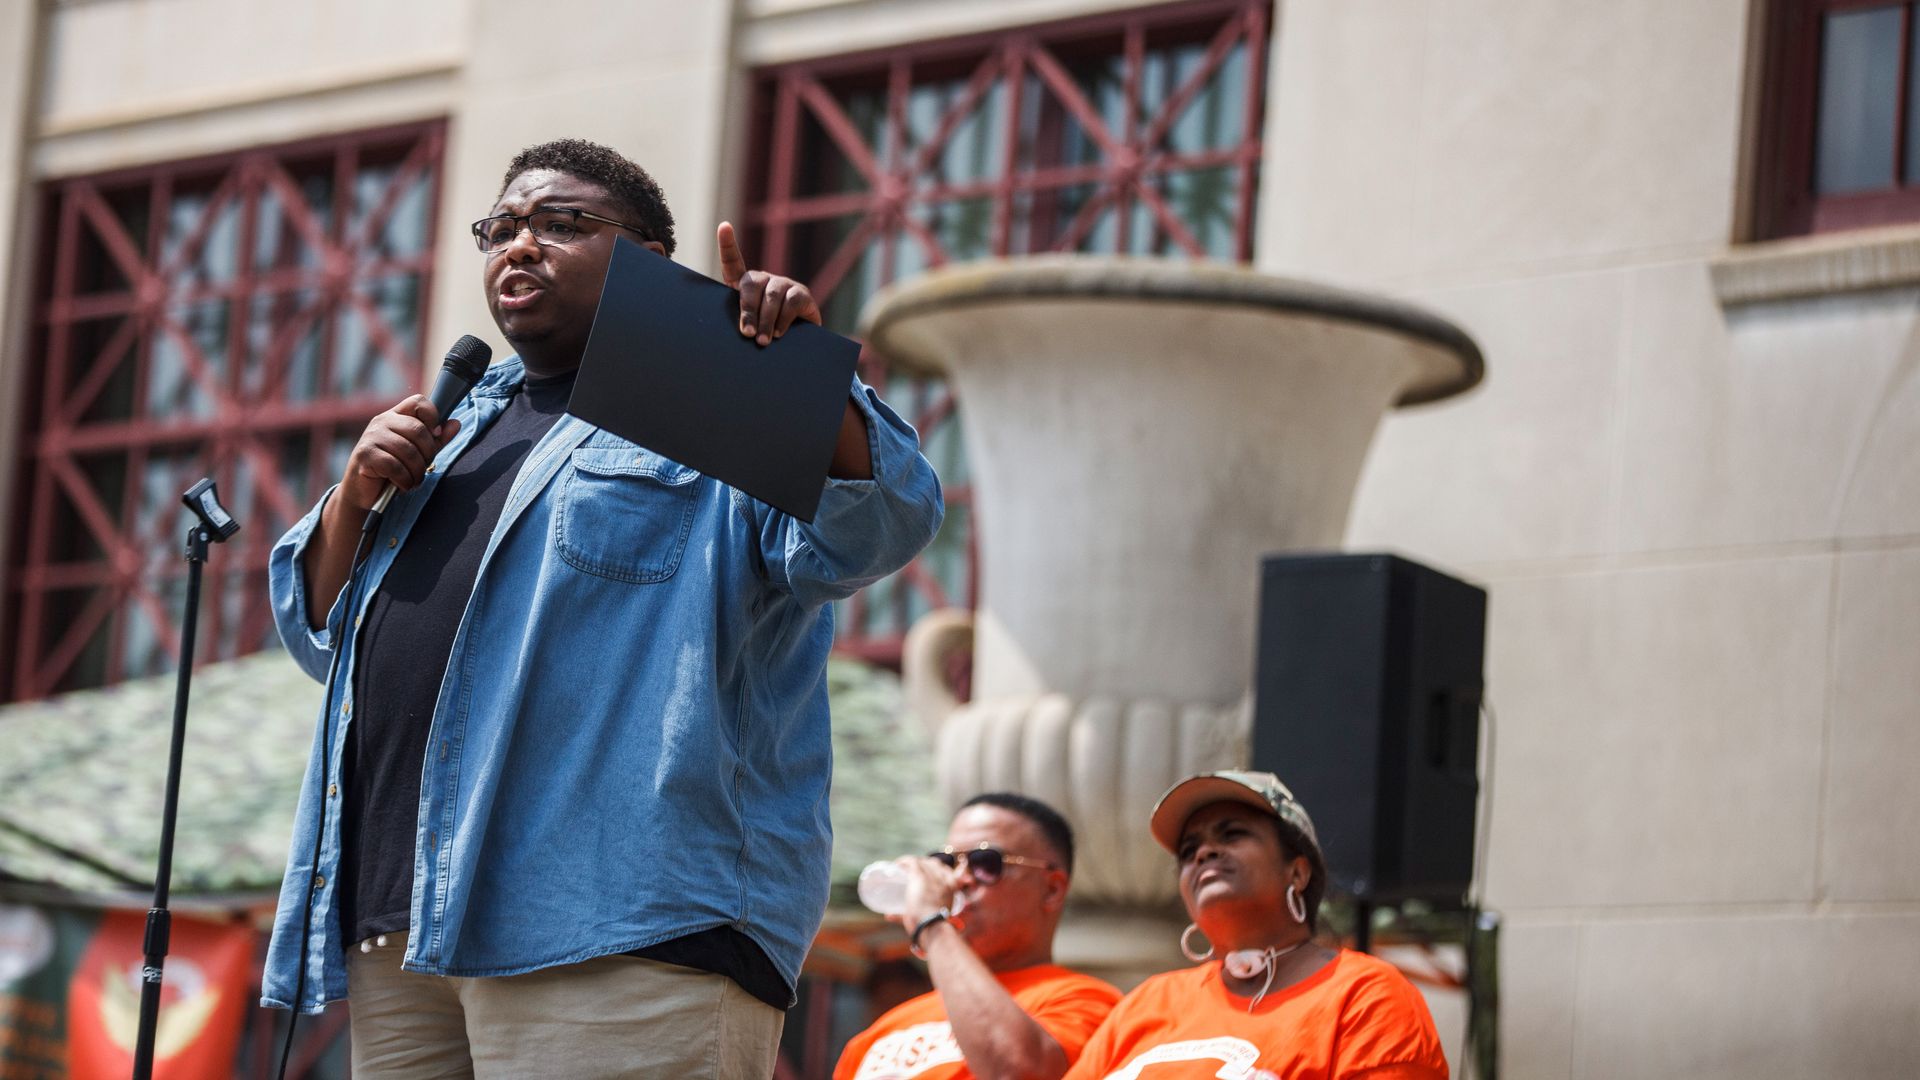 State lawmaker Dontavius Jarrells speaks at an anti-violence rally at Columbus City Hall with two activists pictured behind him.